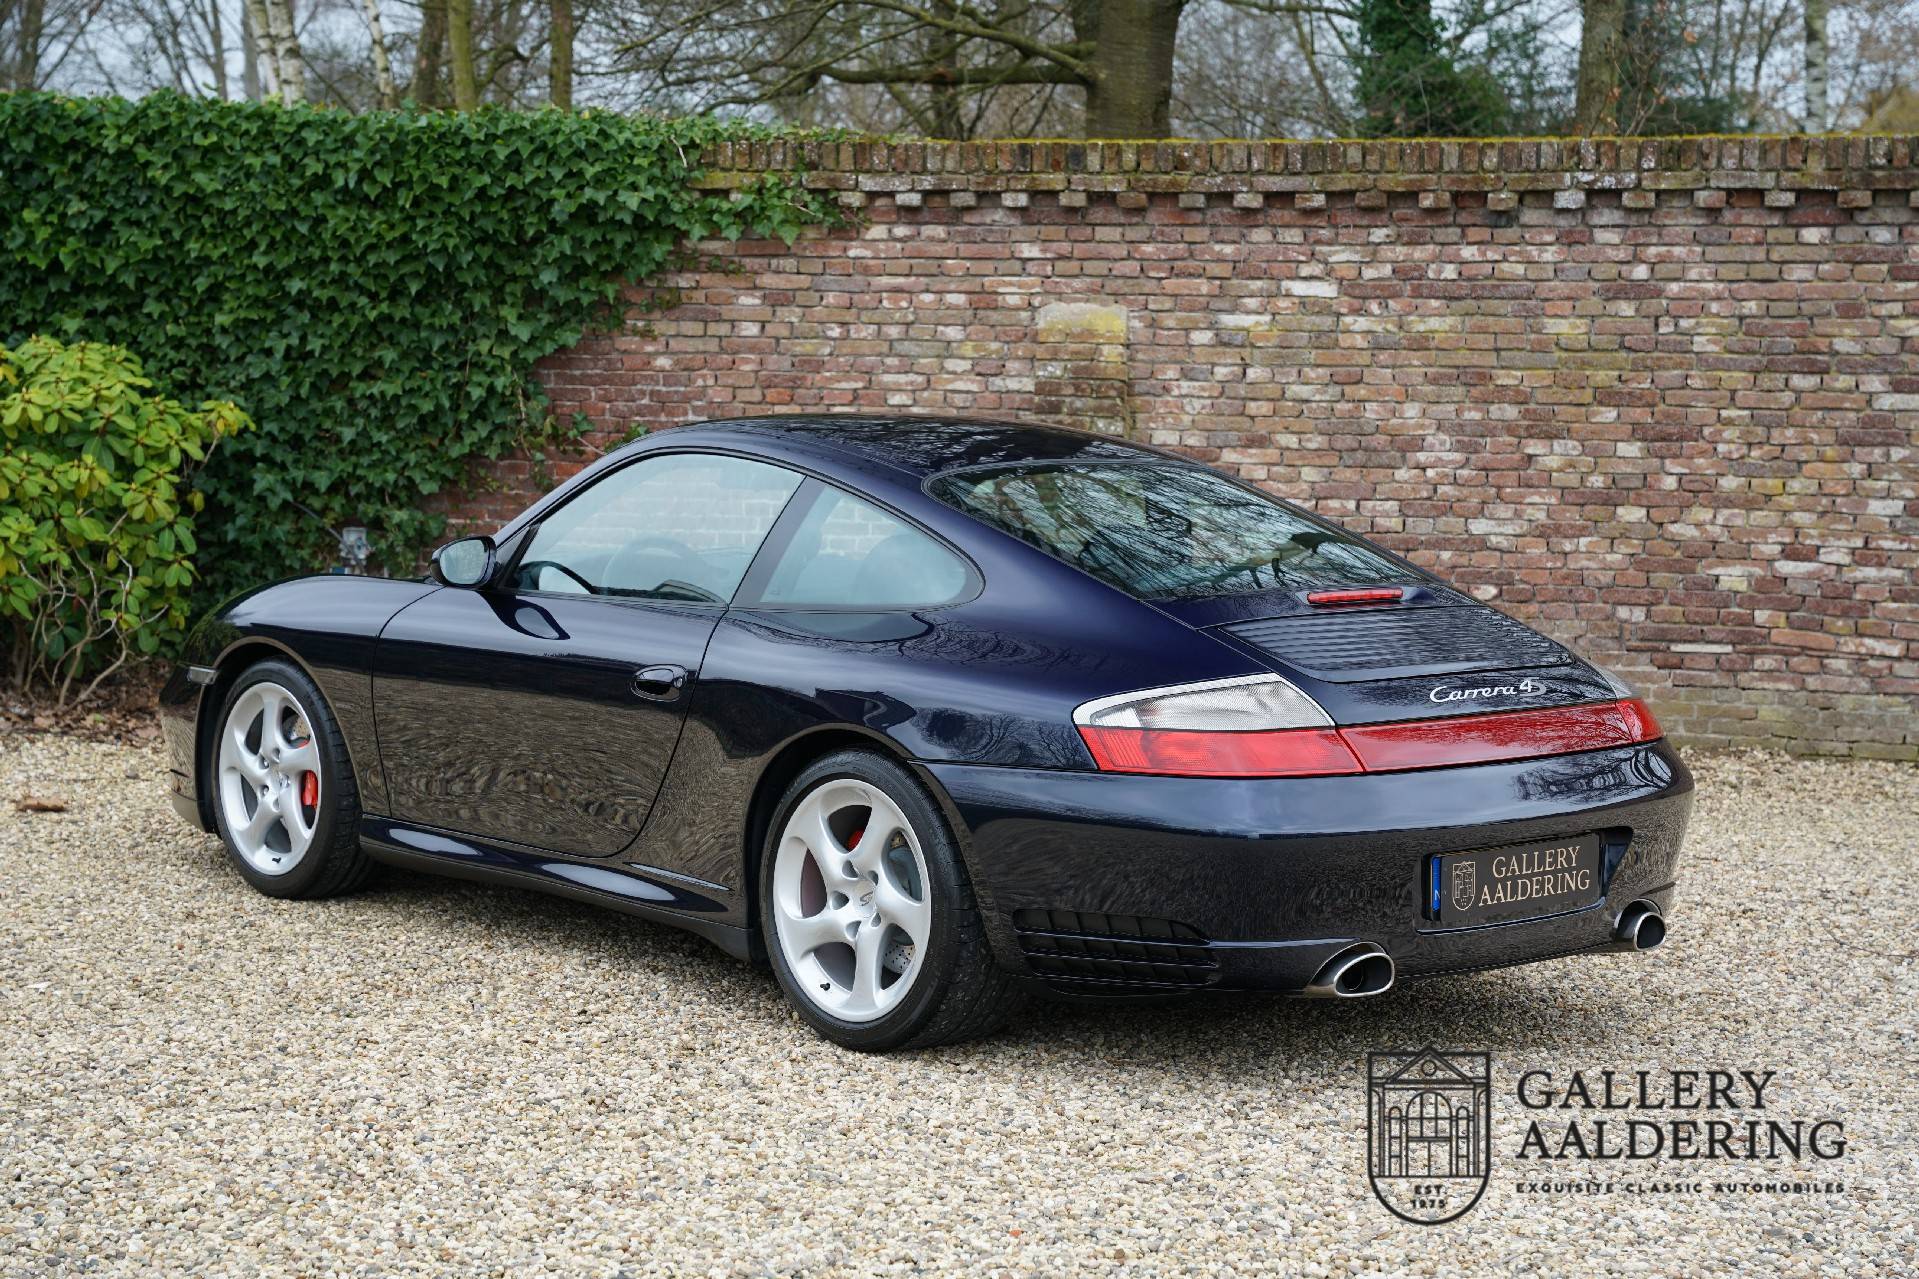 For Sale: Porsche 911 Carrera 4S (2003) offered for GBP 46,385